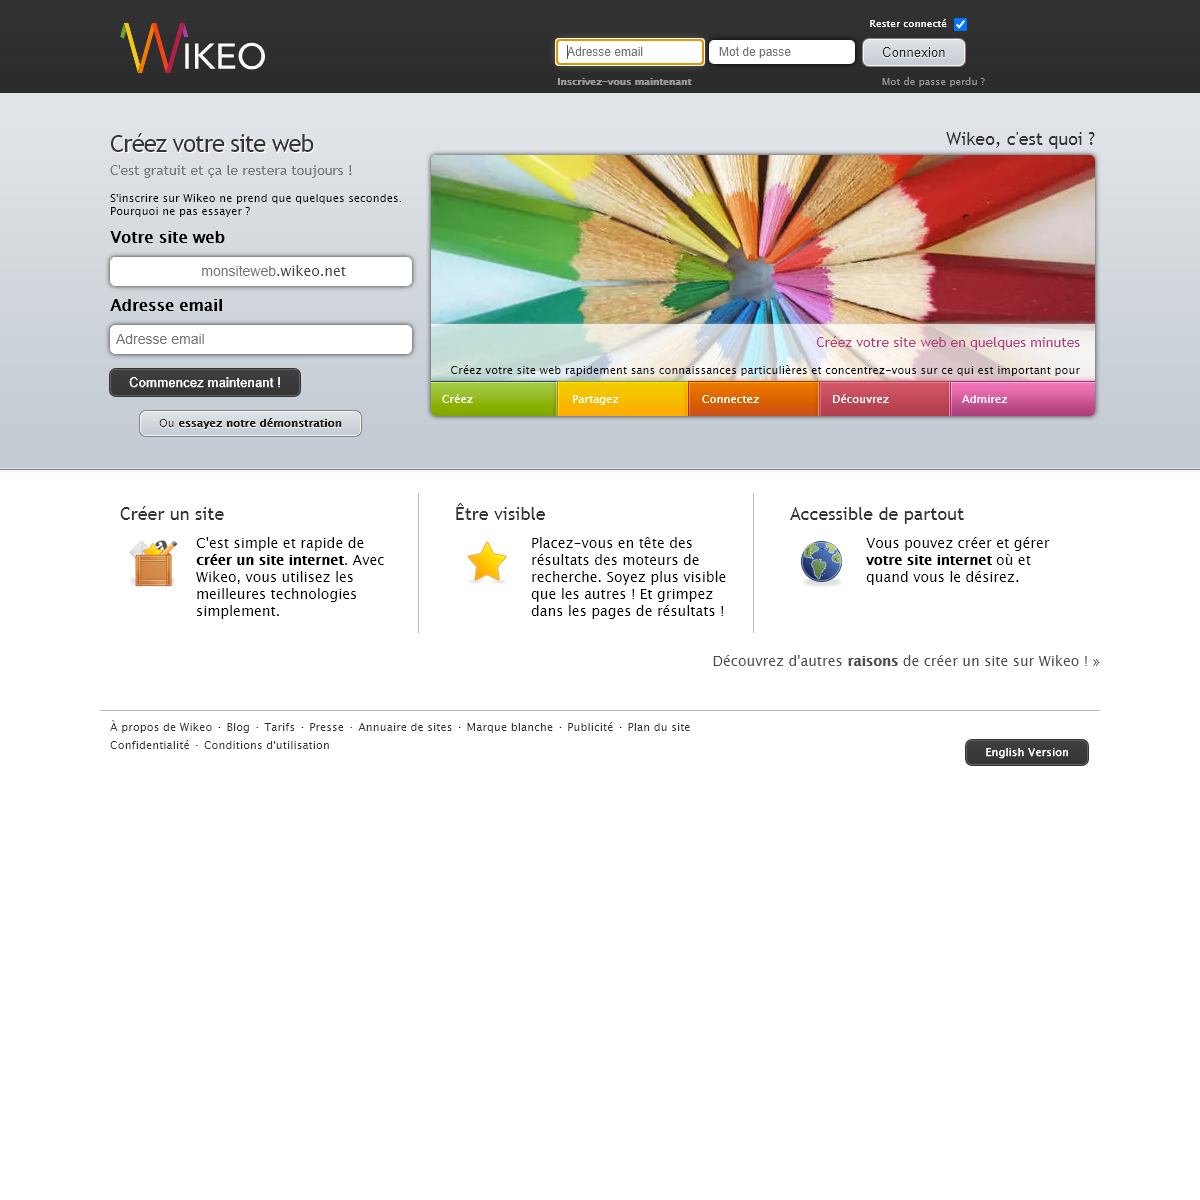 A complete backup of wikeo.net